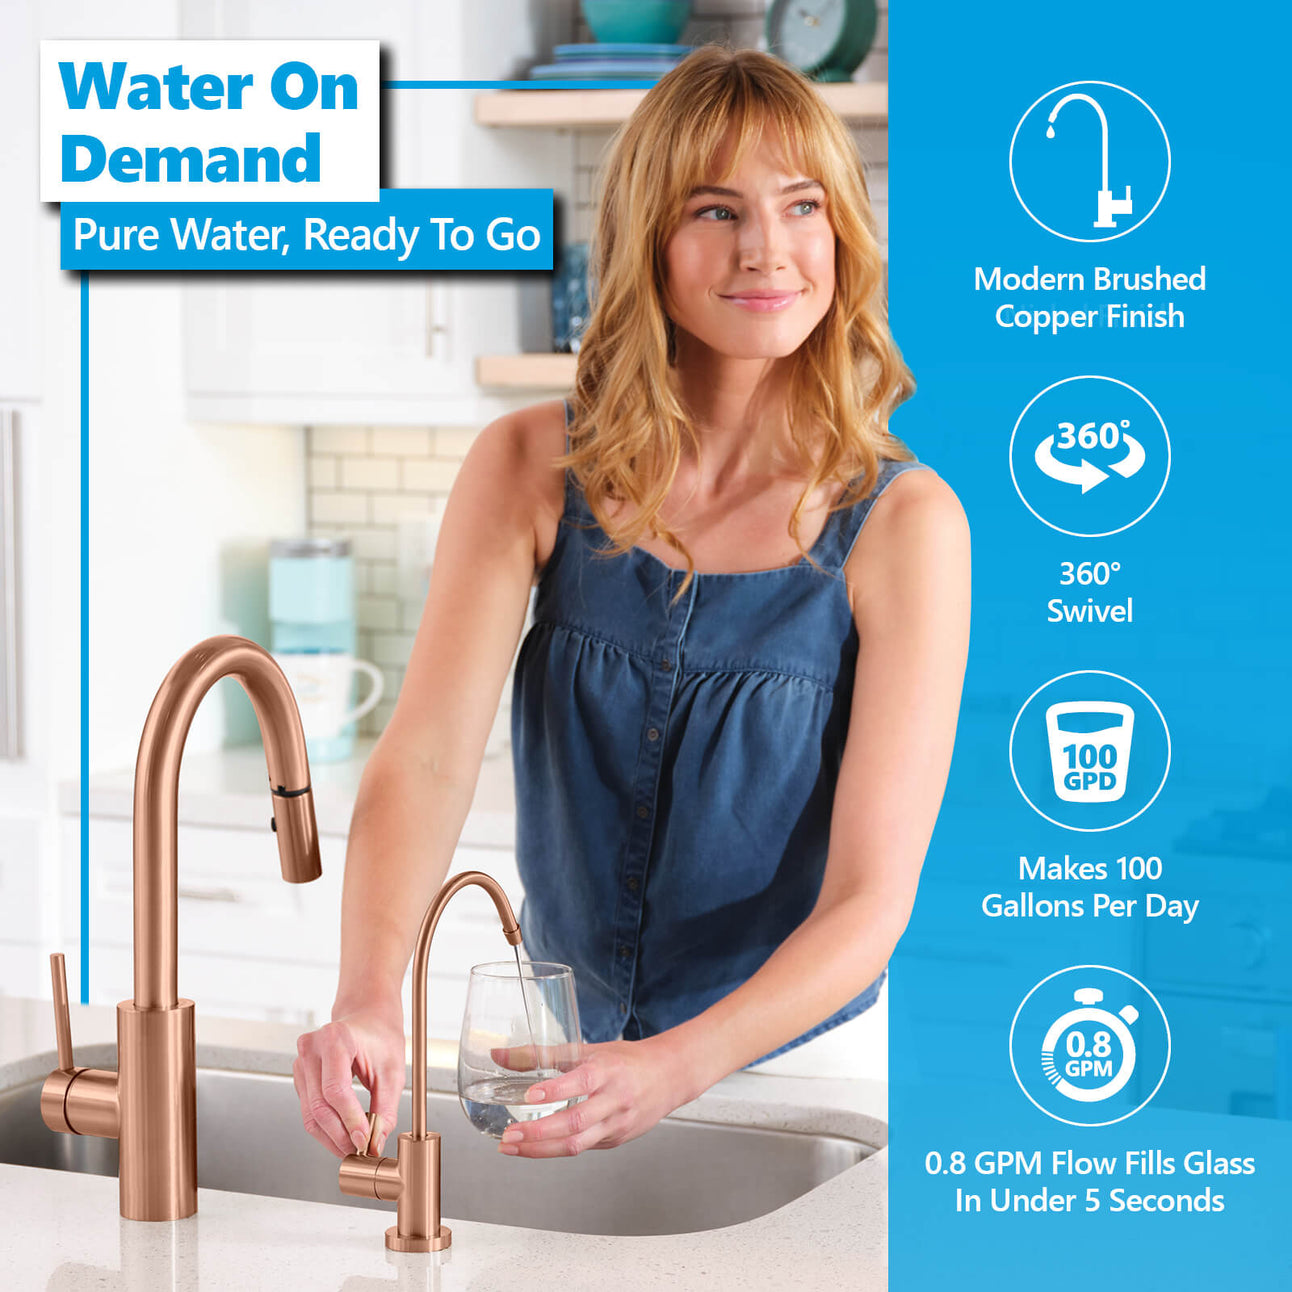 Deionization RO System with modern brushed copper faucet